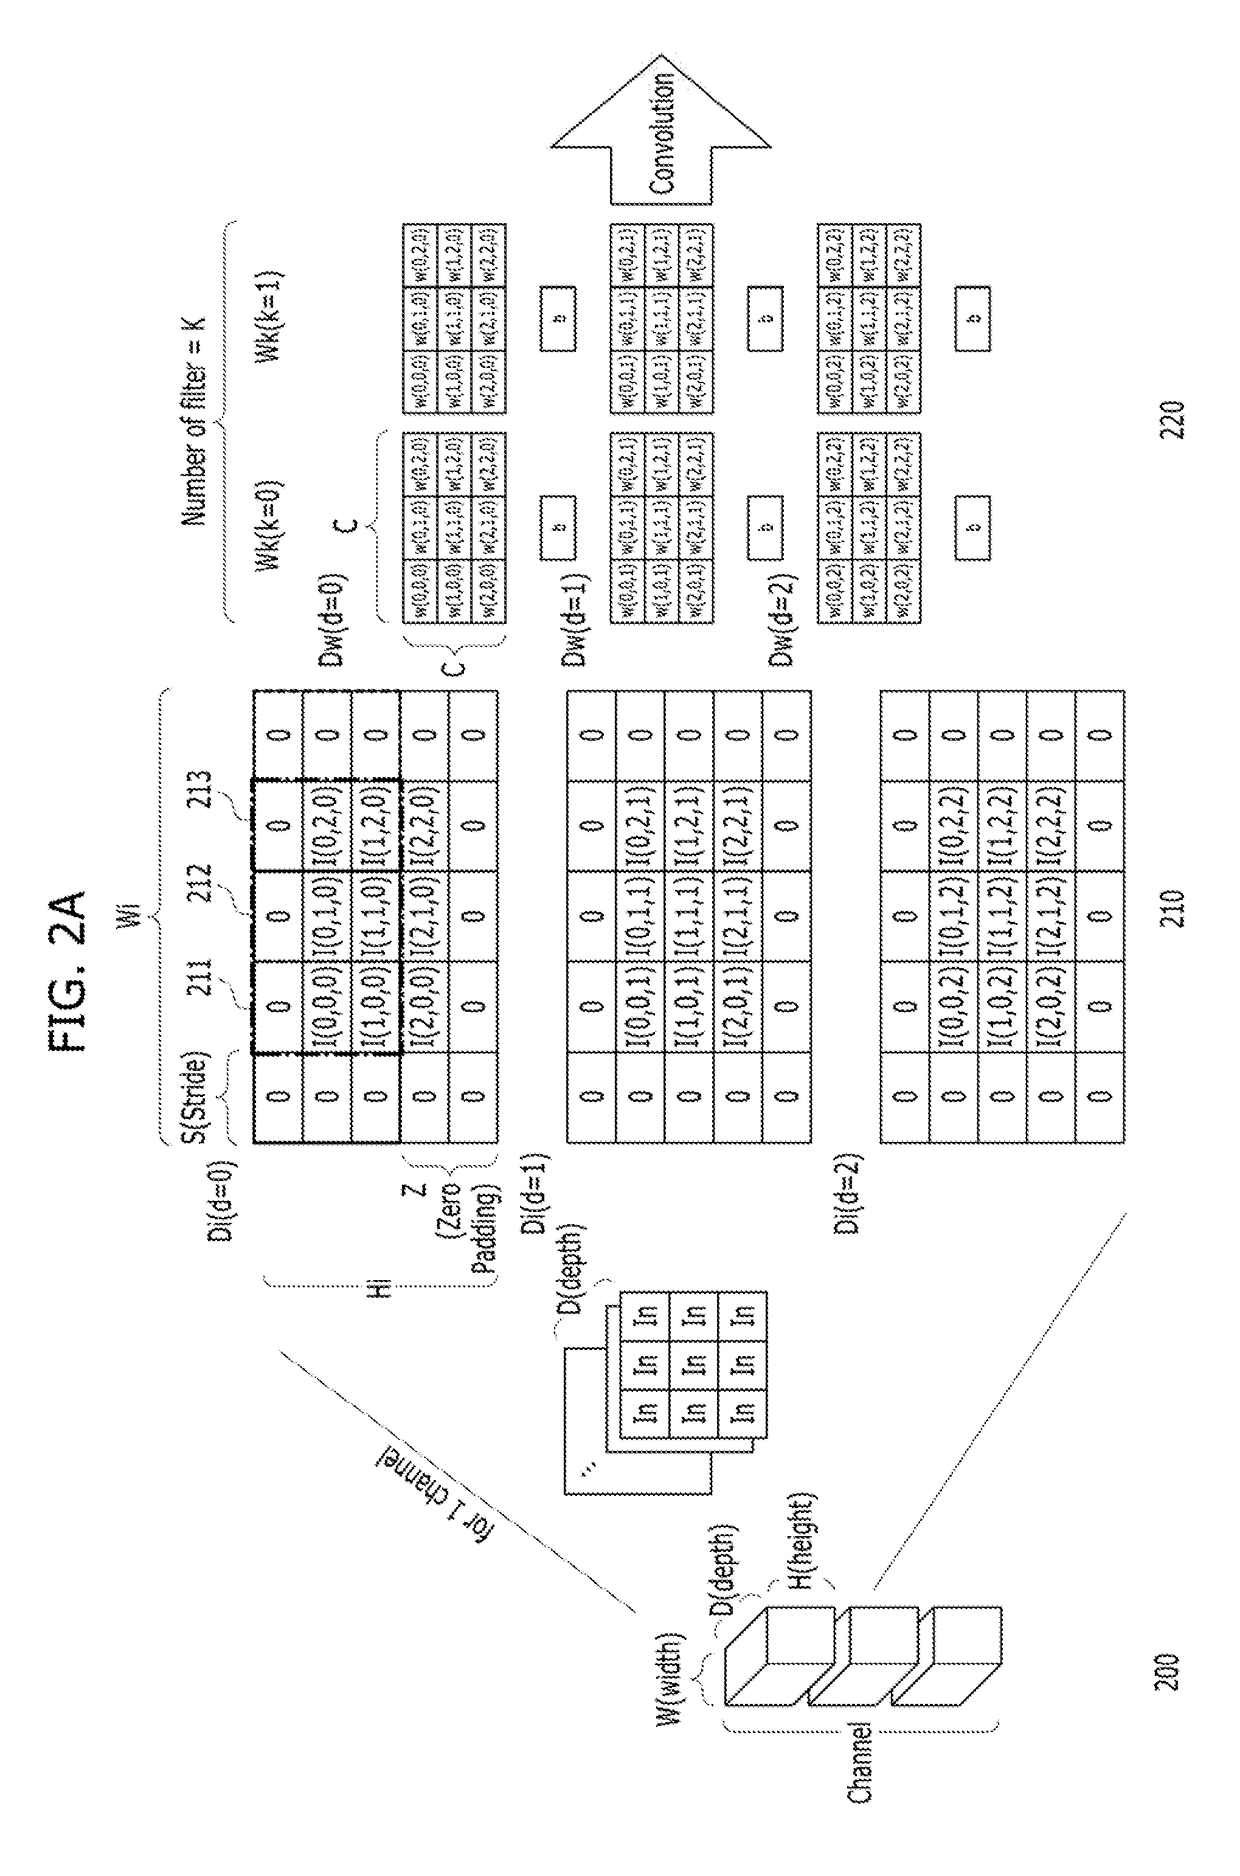 Operation apparatus and method for convolutional neural network